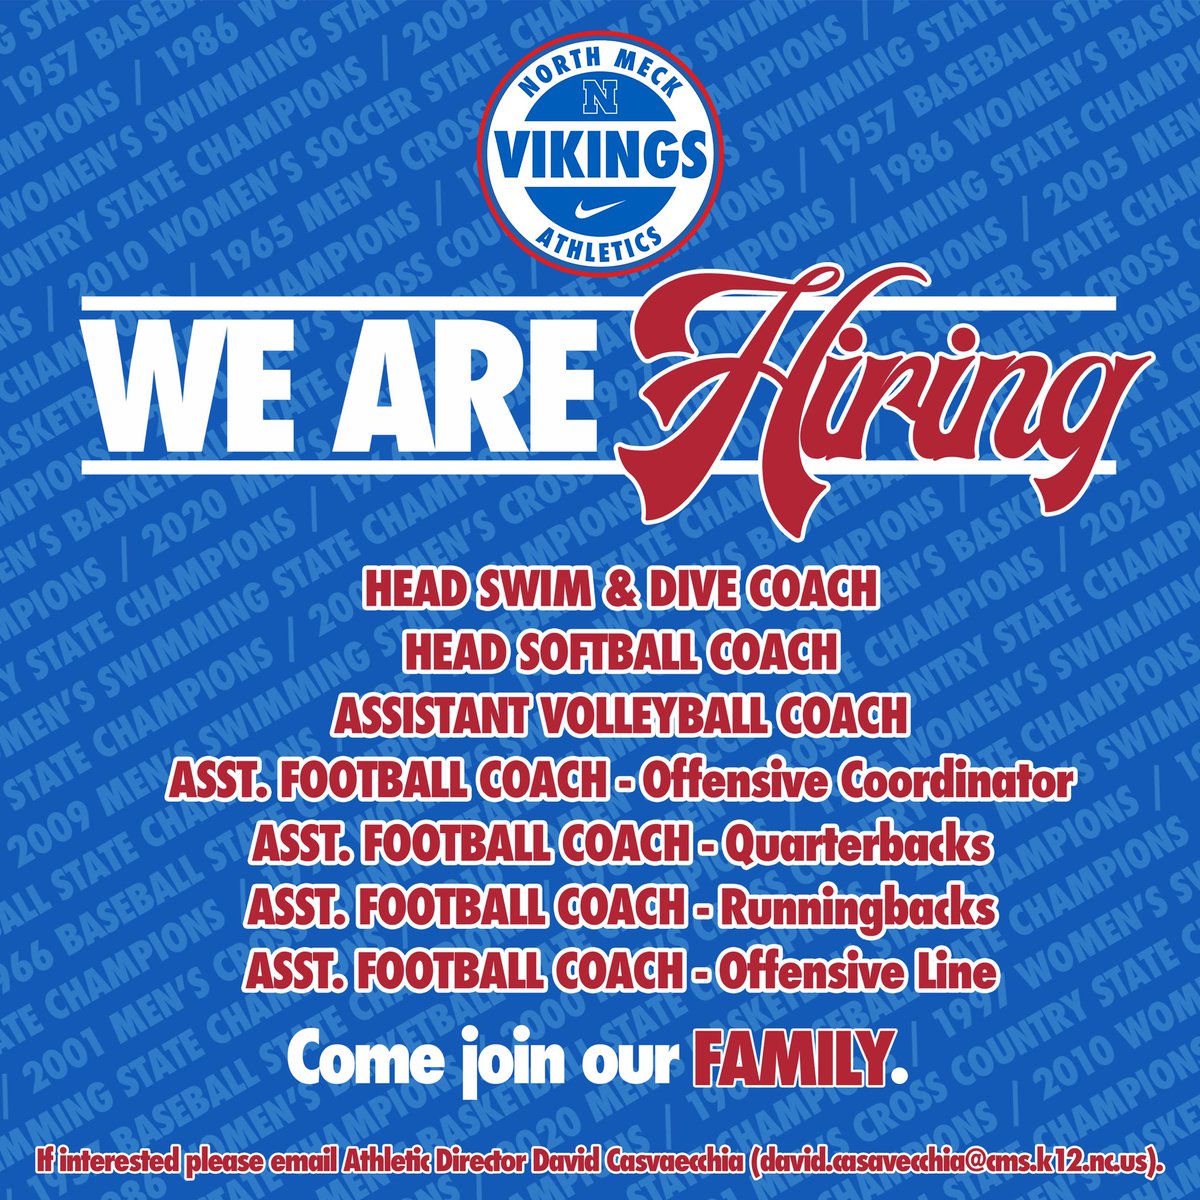 🔵⚪️🔴 HIRING - North Meck is looking for a few good coaches. If interested in any of these positions please email David Casavecchia (david.casavecchia@cms.k12.nc.us). Come join our FAMILY.